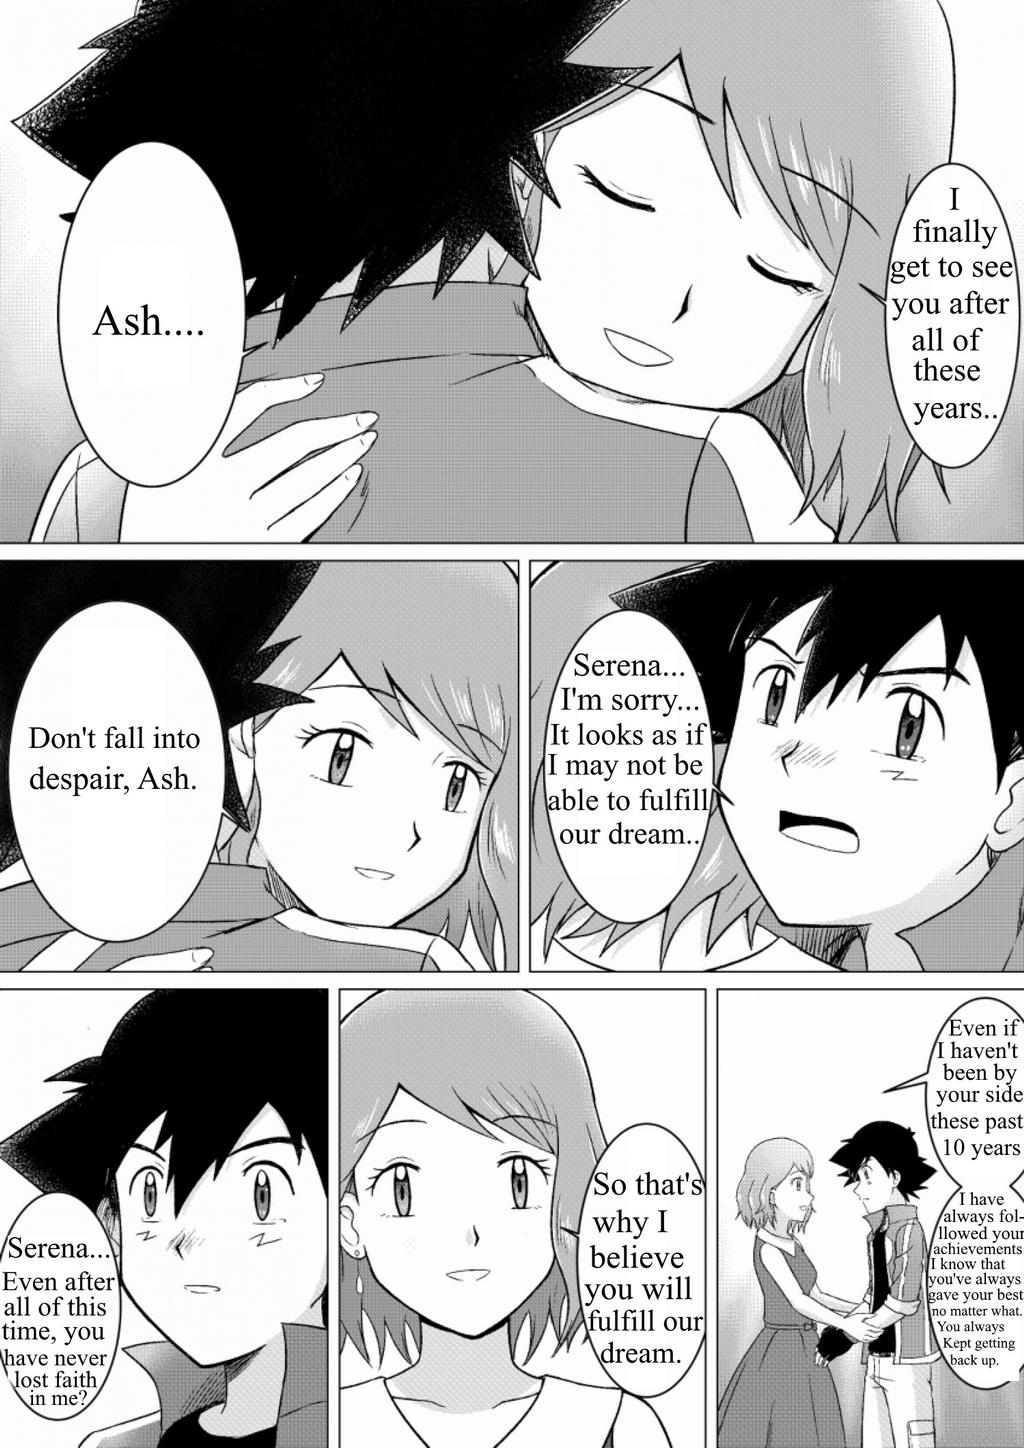 XYZ: Road to Master Part 1 P2 (A goodbye) by Quasar1007 on DeviantArt